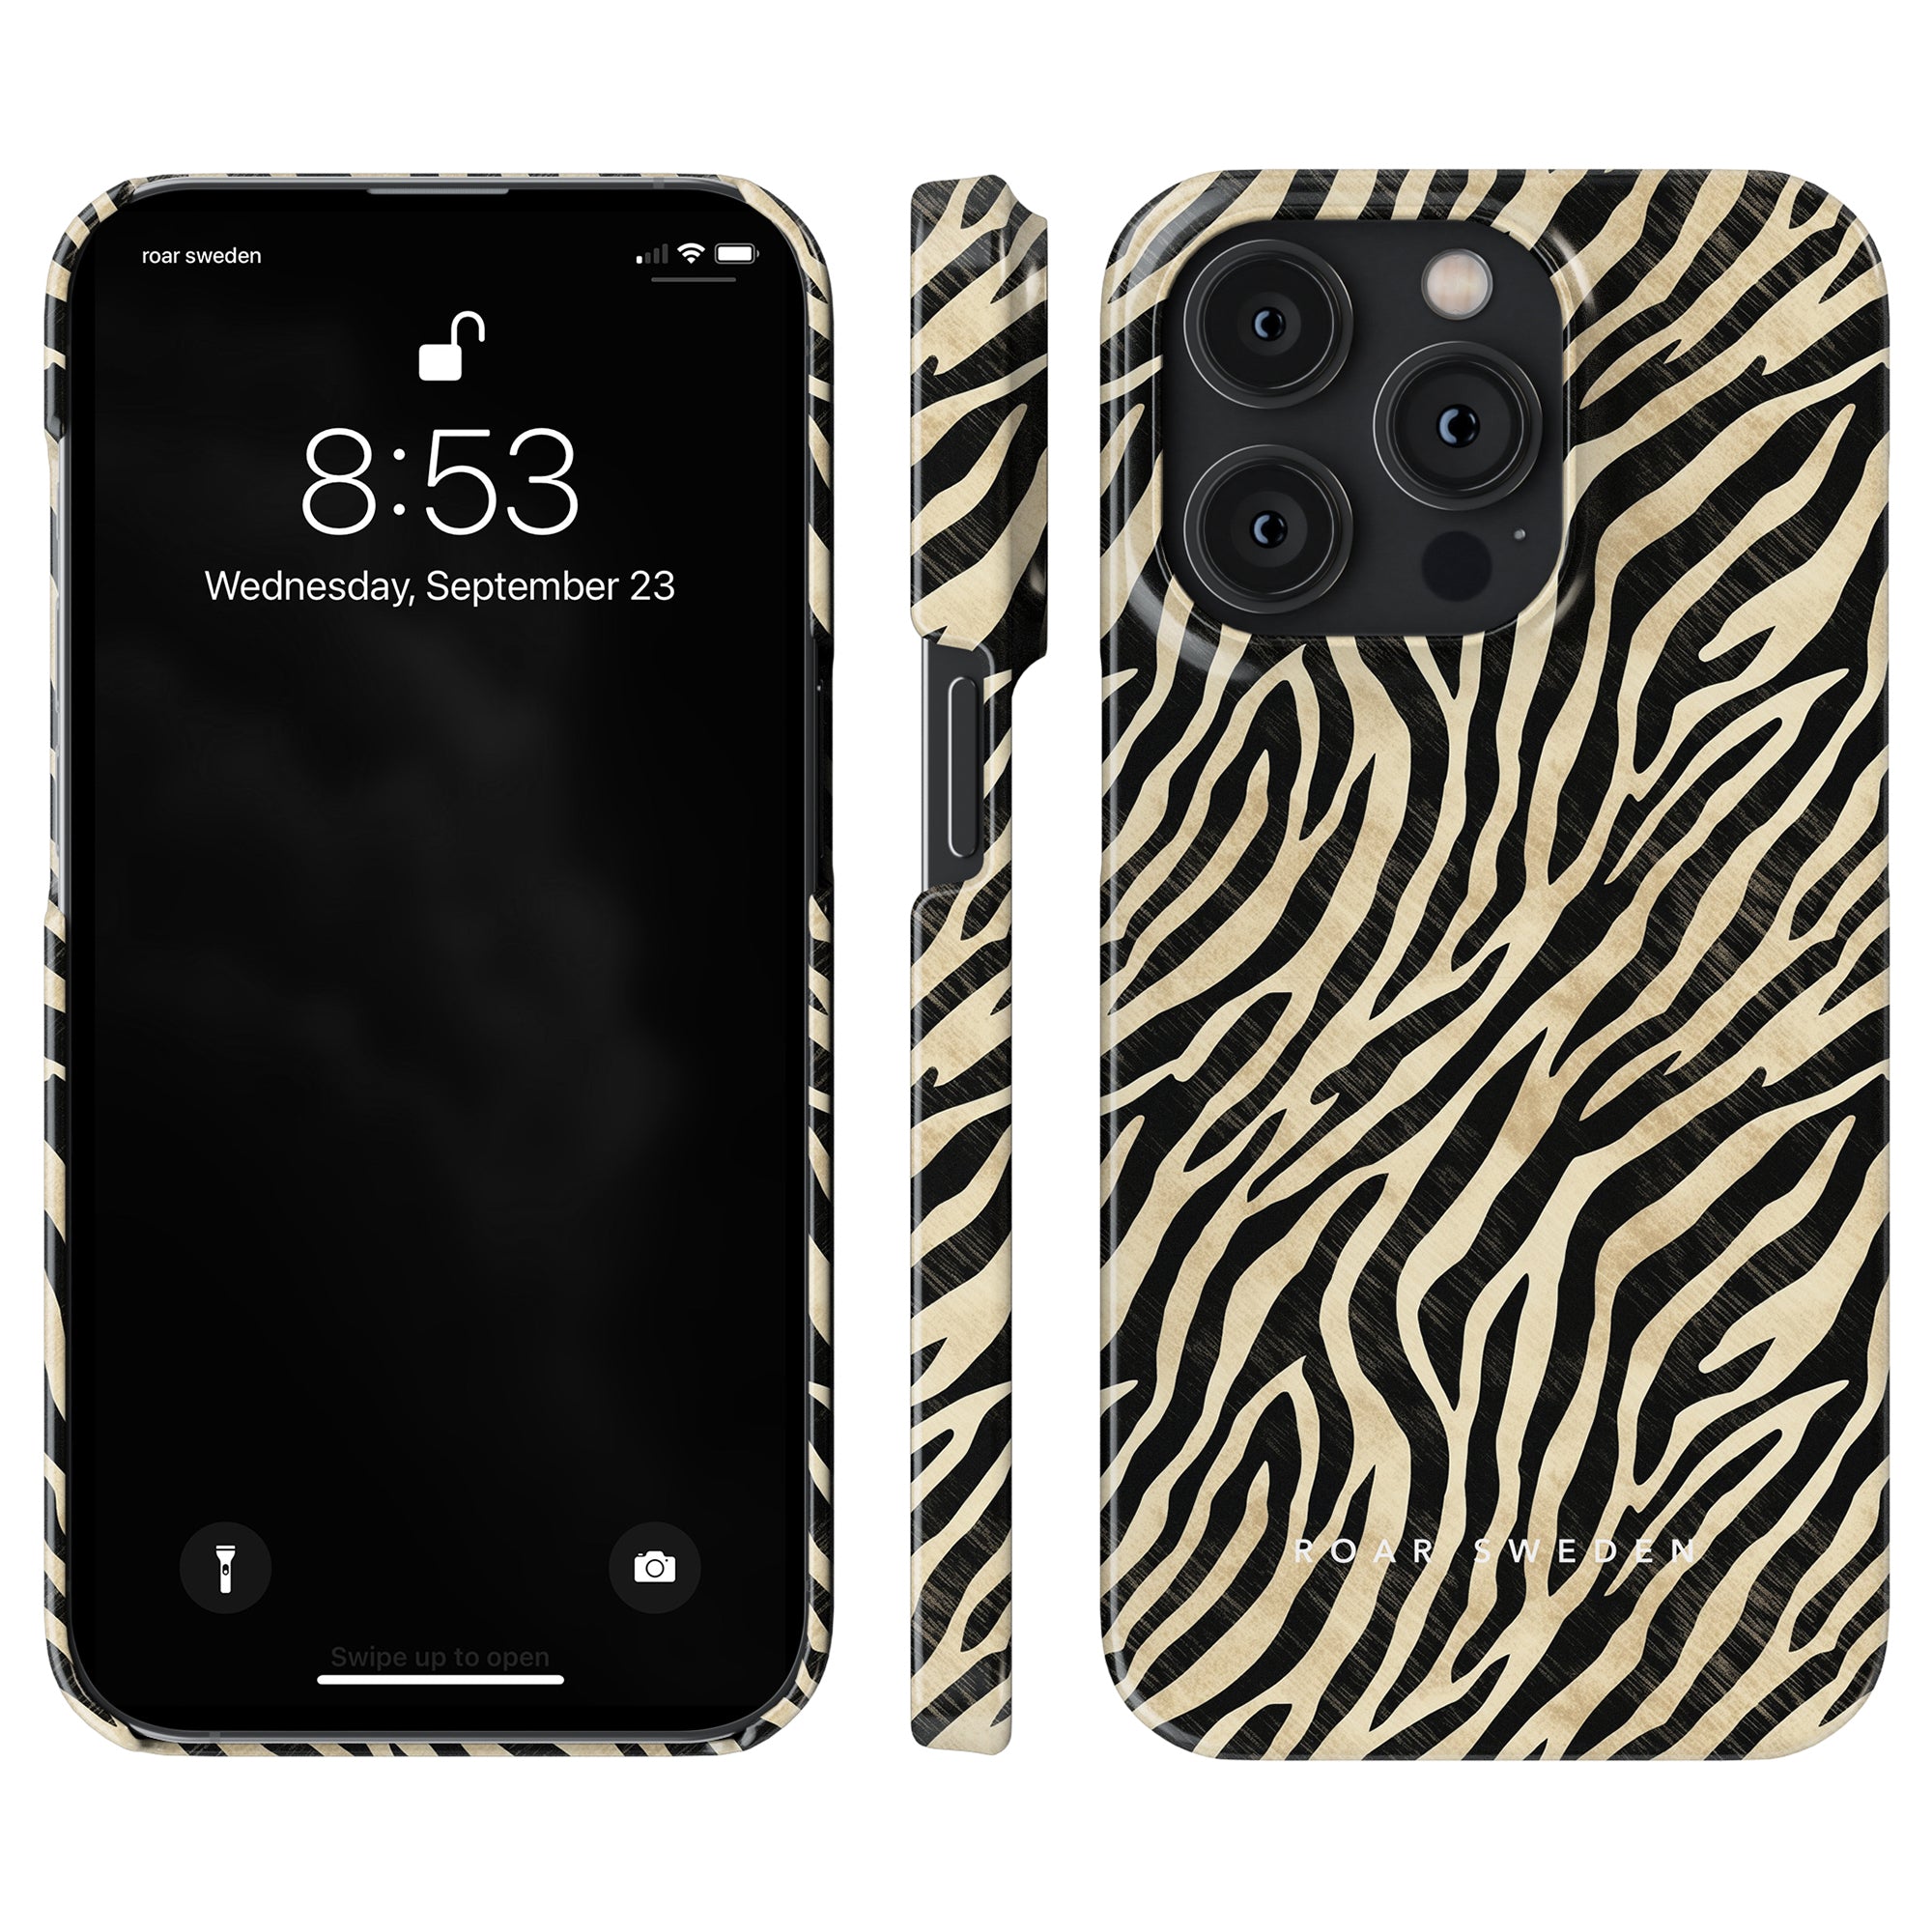 A smartphone from the exclusive Zebra Collection with a Marty - Slim case is displayed from the front and back, showing the lock screen with the time and date, and a side view of the stylish mobilskal.